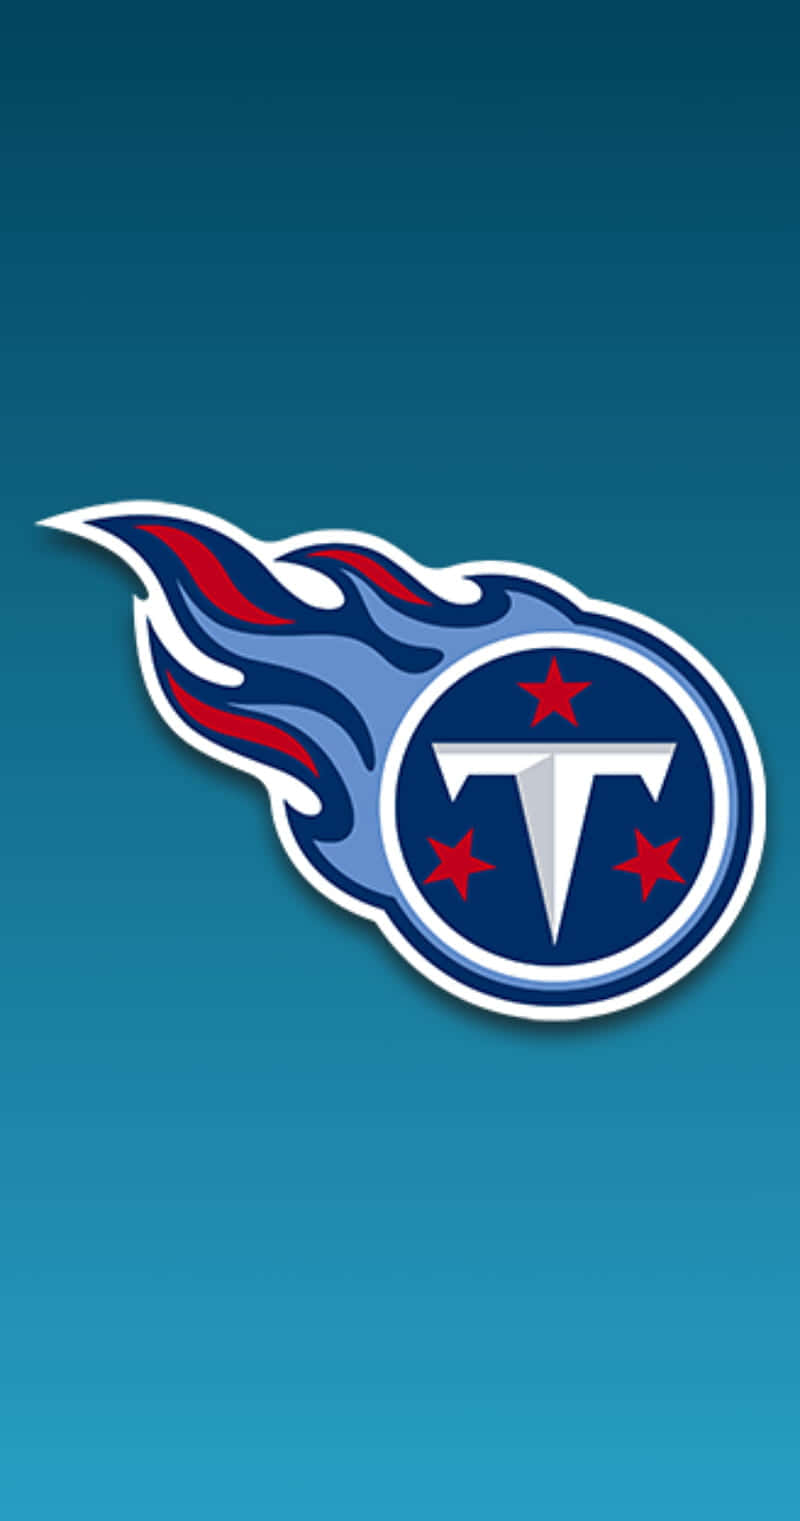 Show off your Tennessee Titans pride with this customized iPhone case. Wallpaper